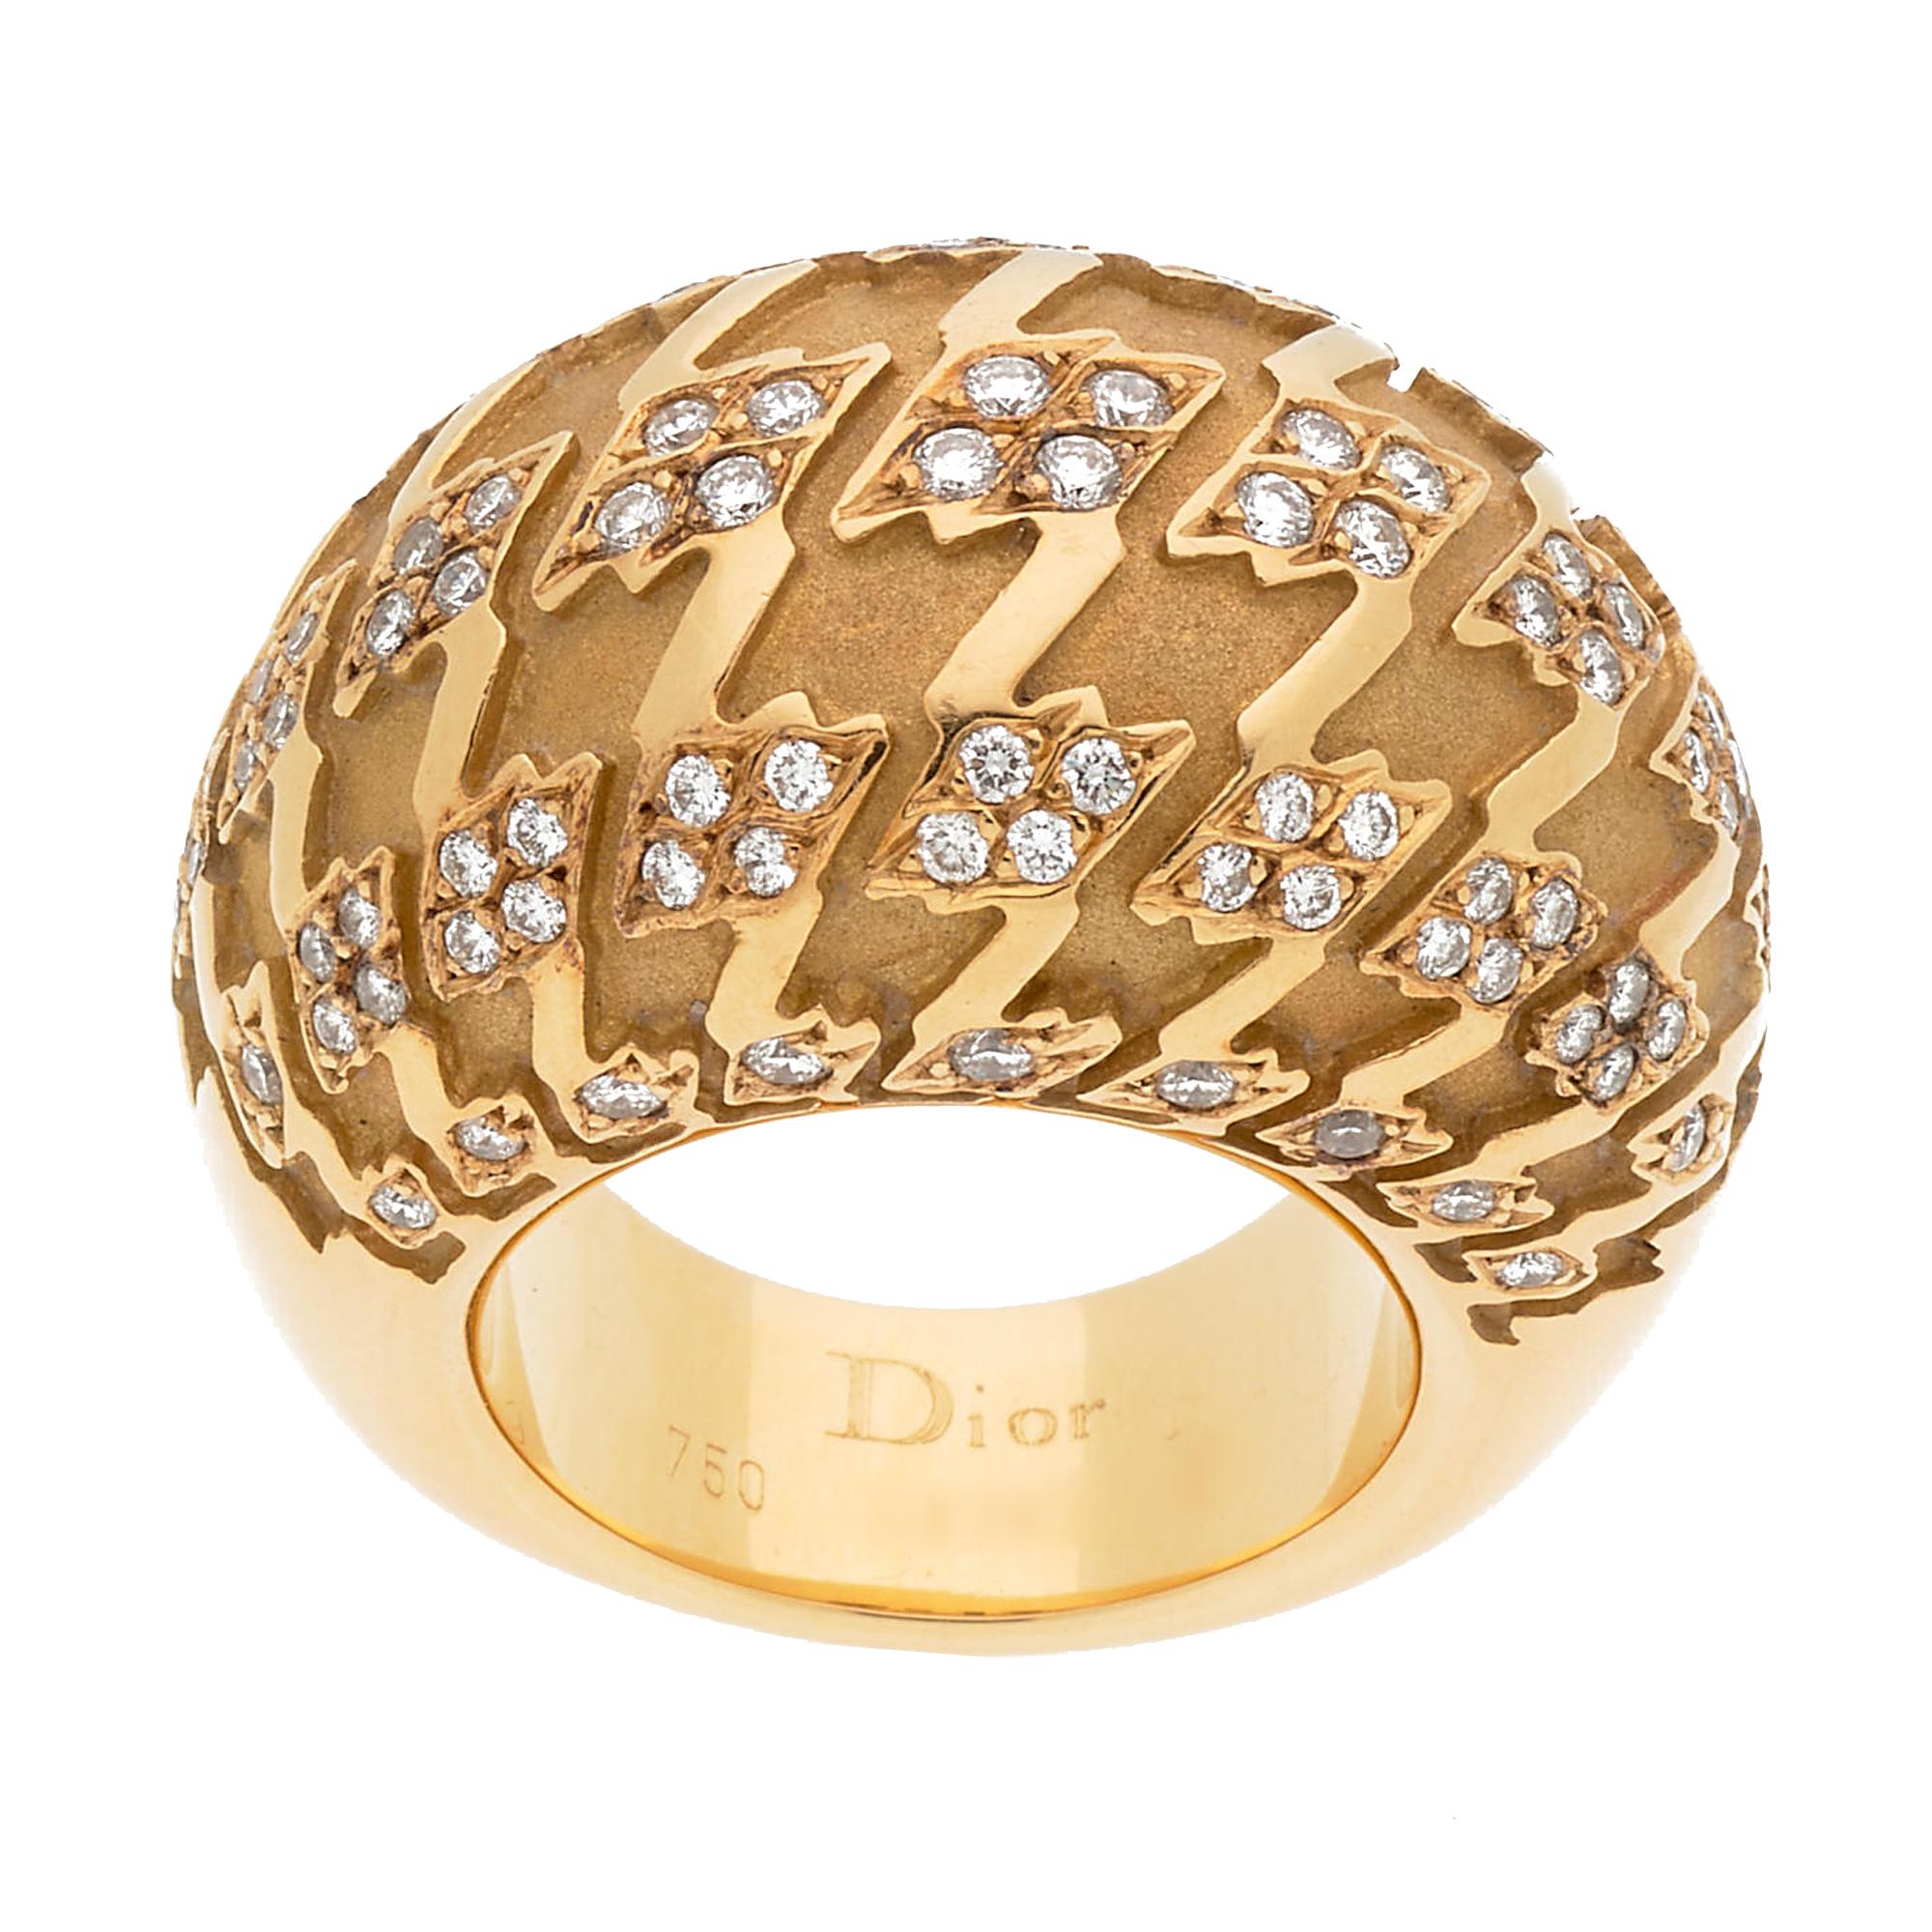 The Dior Houndstooth Yellow Gold Diamond Bombe Cocktail Ring is a stunning piece of jewelry that exemplifies luxury and craftsmanship. This exquisite ring draws inspiration from the iconic houndstooth pattern, a testament to Dior's rich fashion